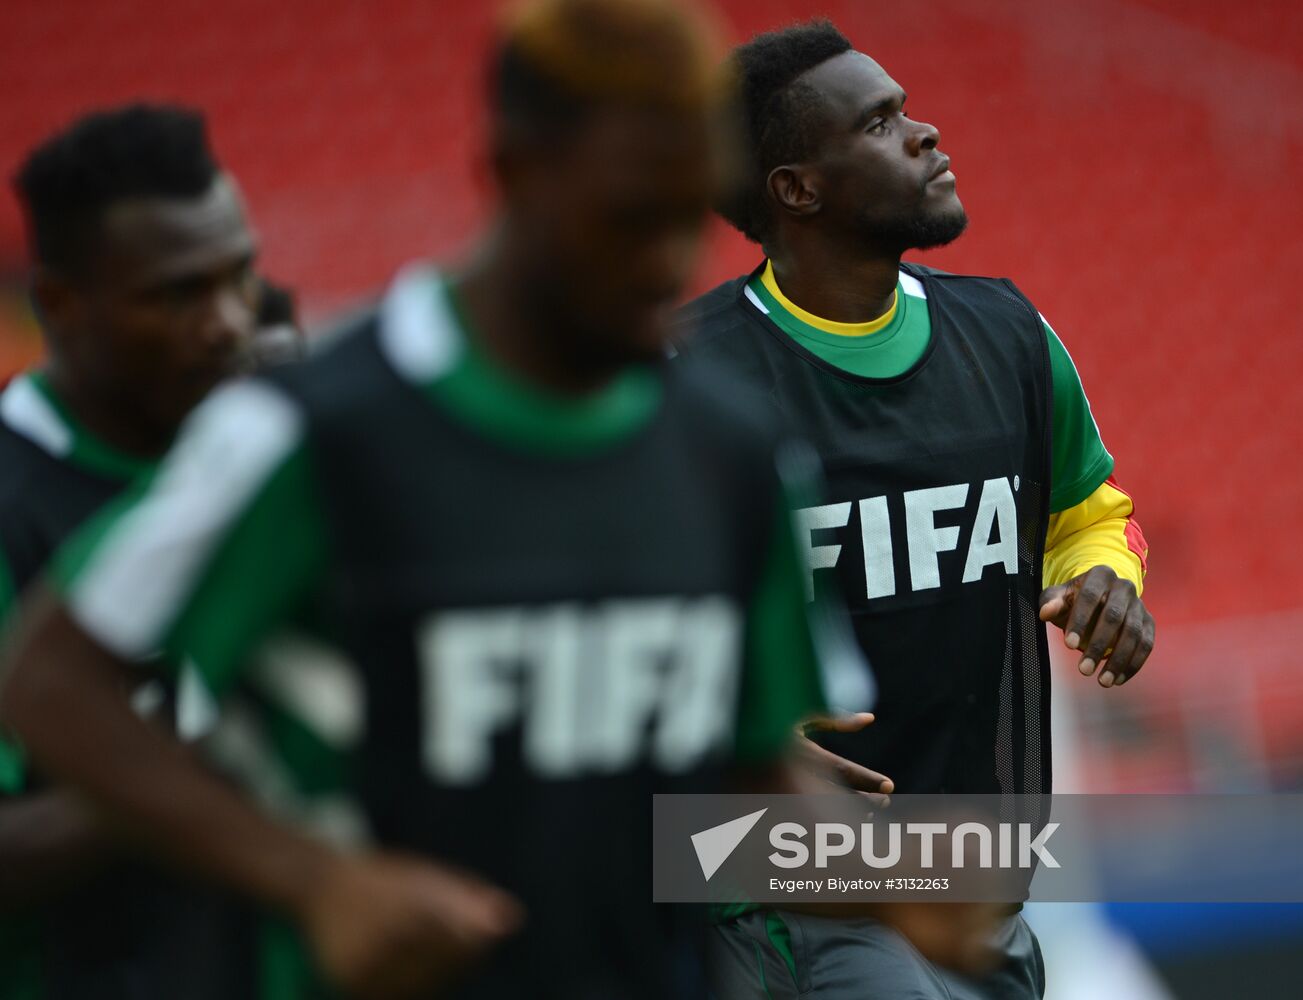 2017 Confederations Cup. Cameroon team holds training session